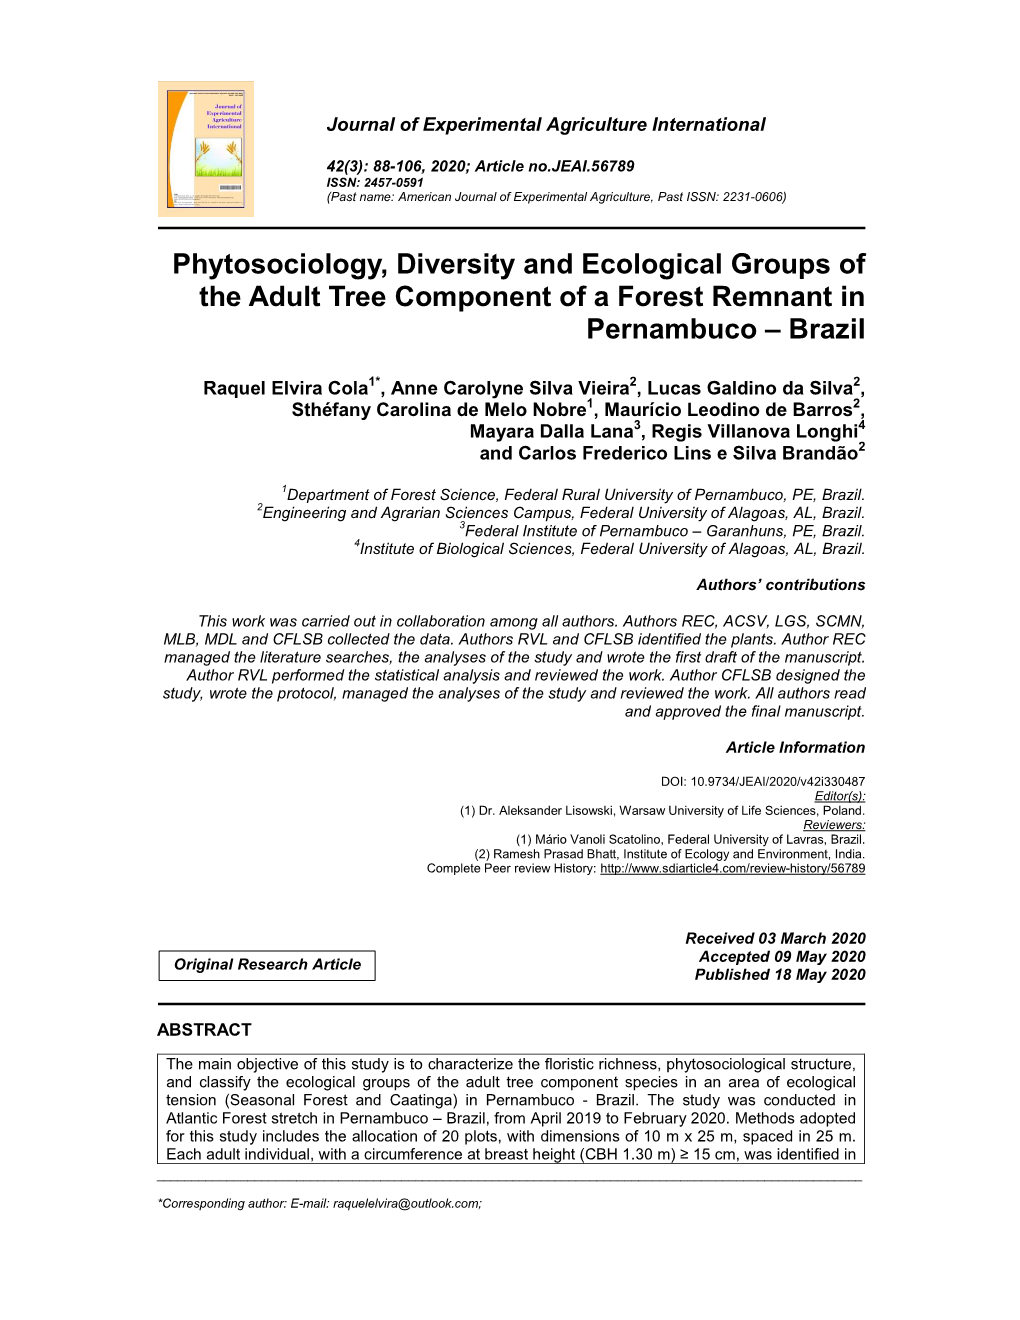 Phytosociology, Diversity and Ecological Groups of the Adult Tree Component of a Forest Remnant in Pernambuco – Brazil